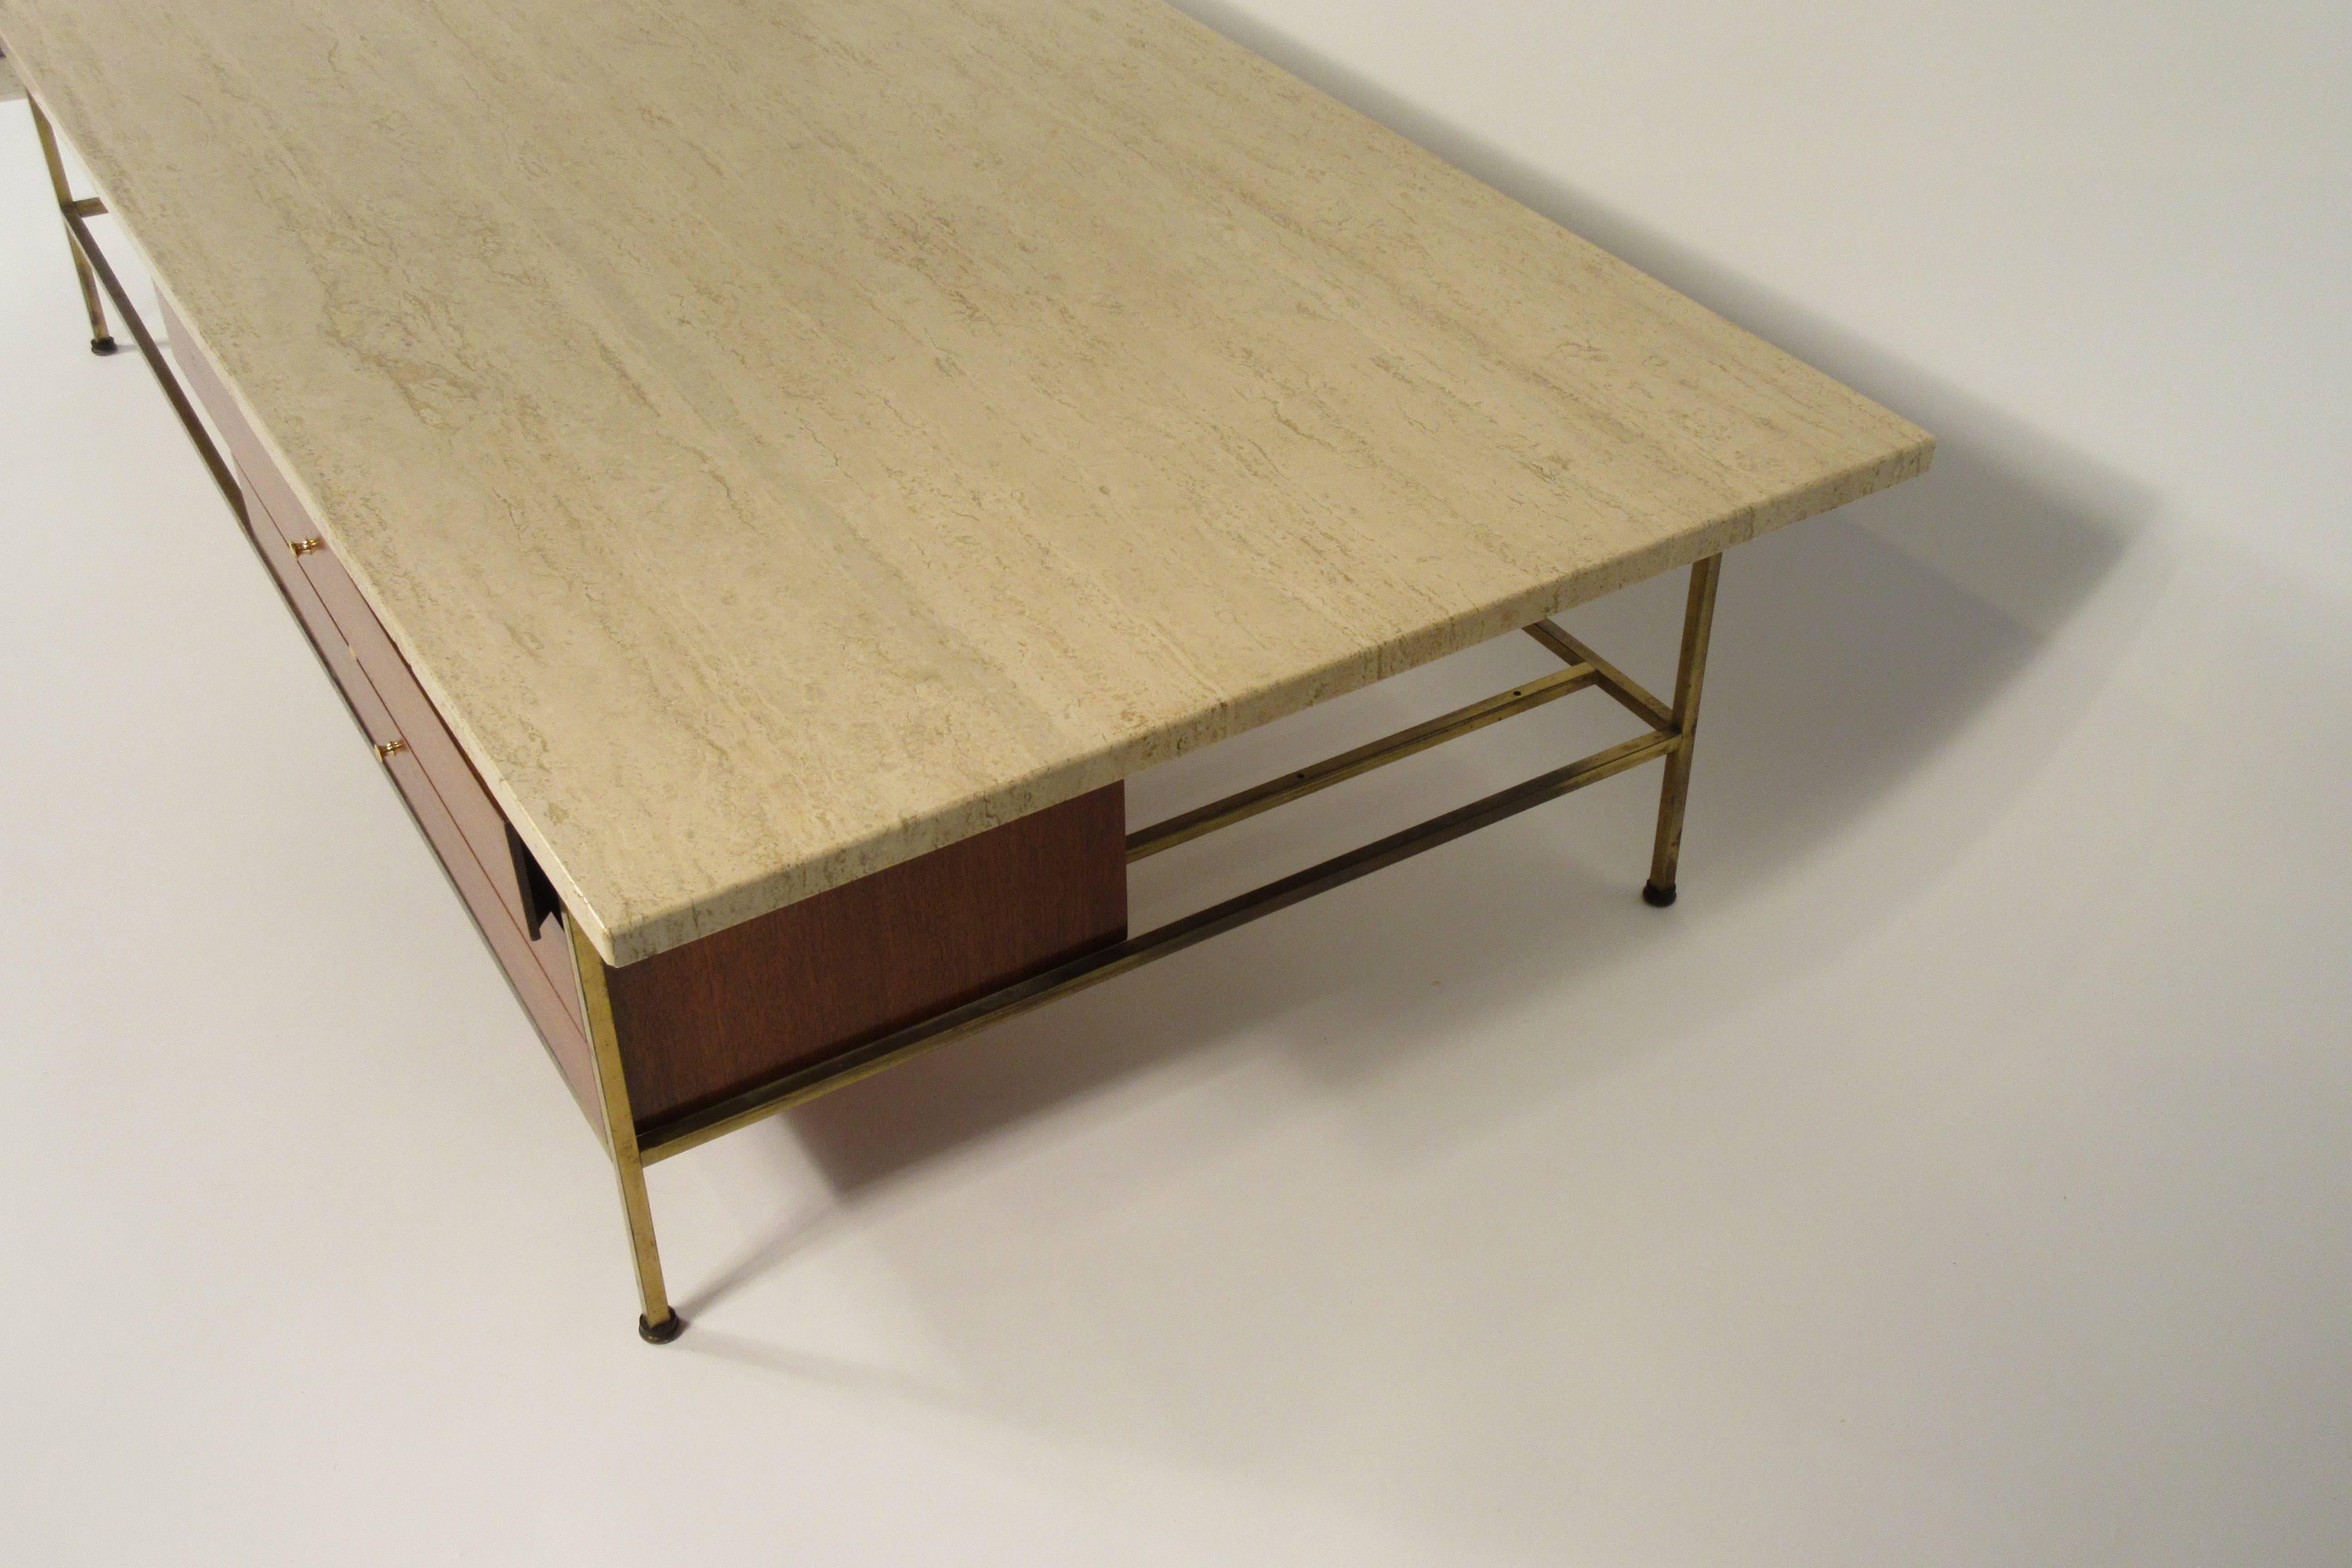 1960s Paul McCobb walnut coffee table with travertine top. Label in drawer.